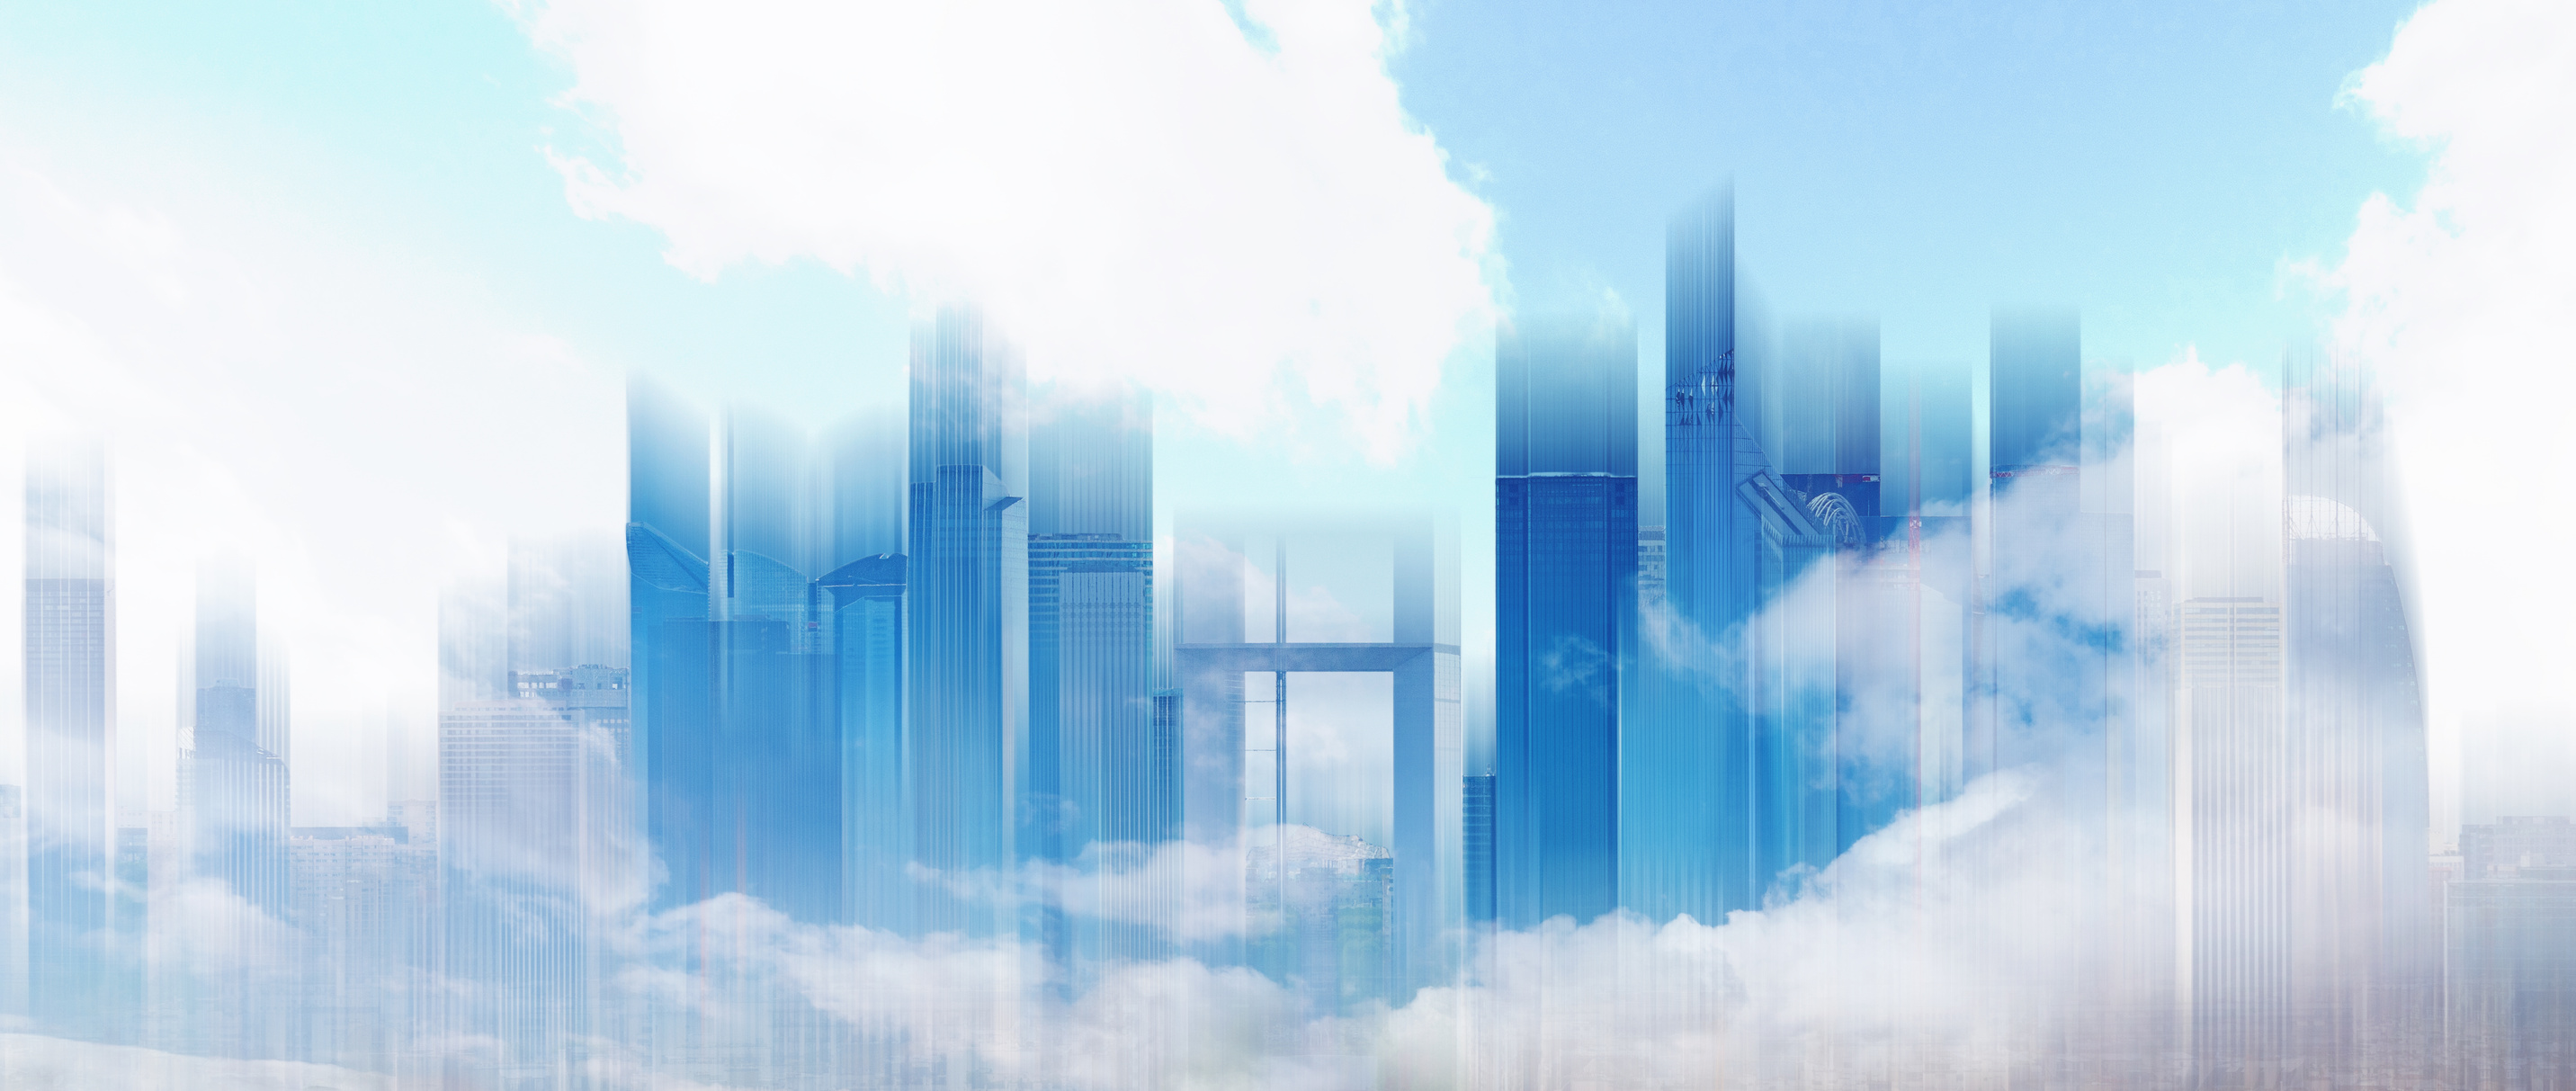 Abstract city skyline in blue sky and white clouds. Abstract city background